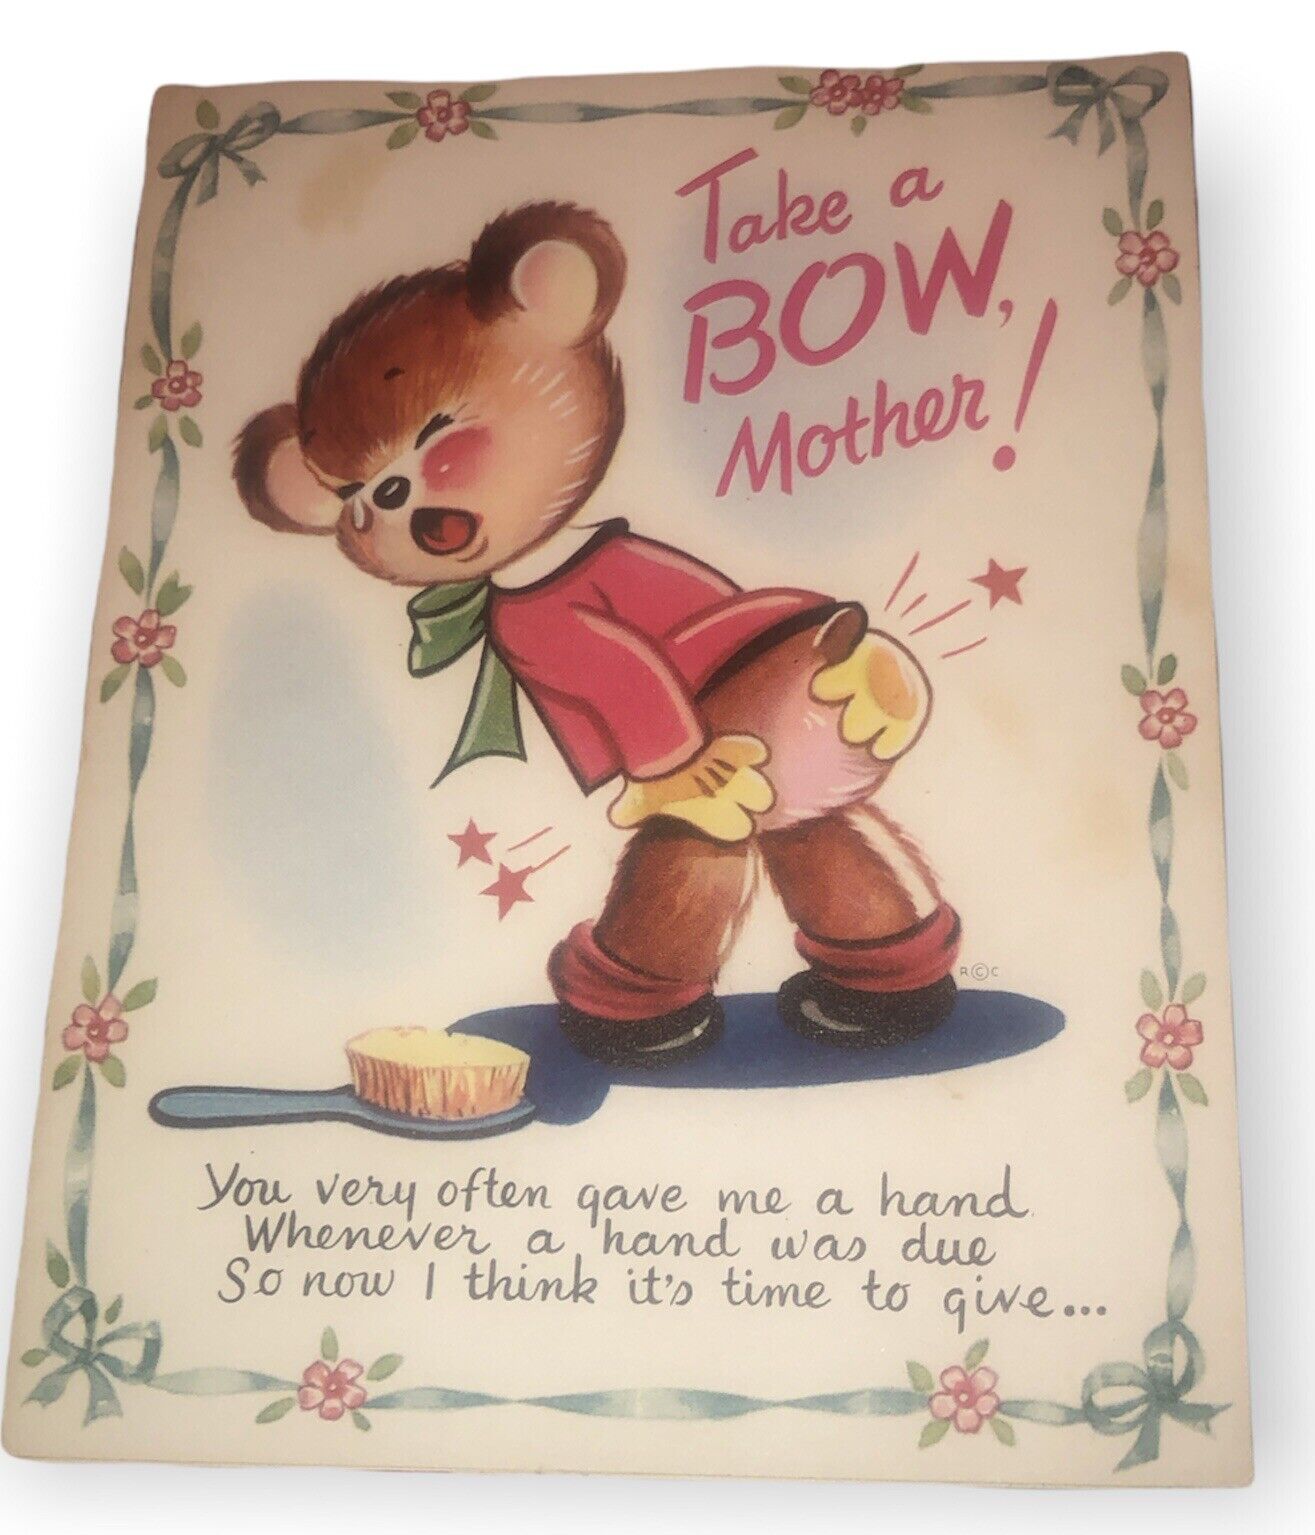 Rust Craft 1951 Vintage Mothers Day 3-D “Take A Bow Mother” Card